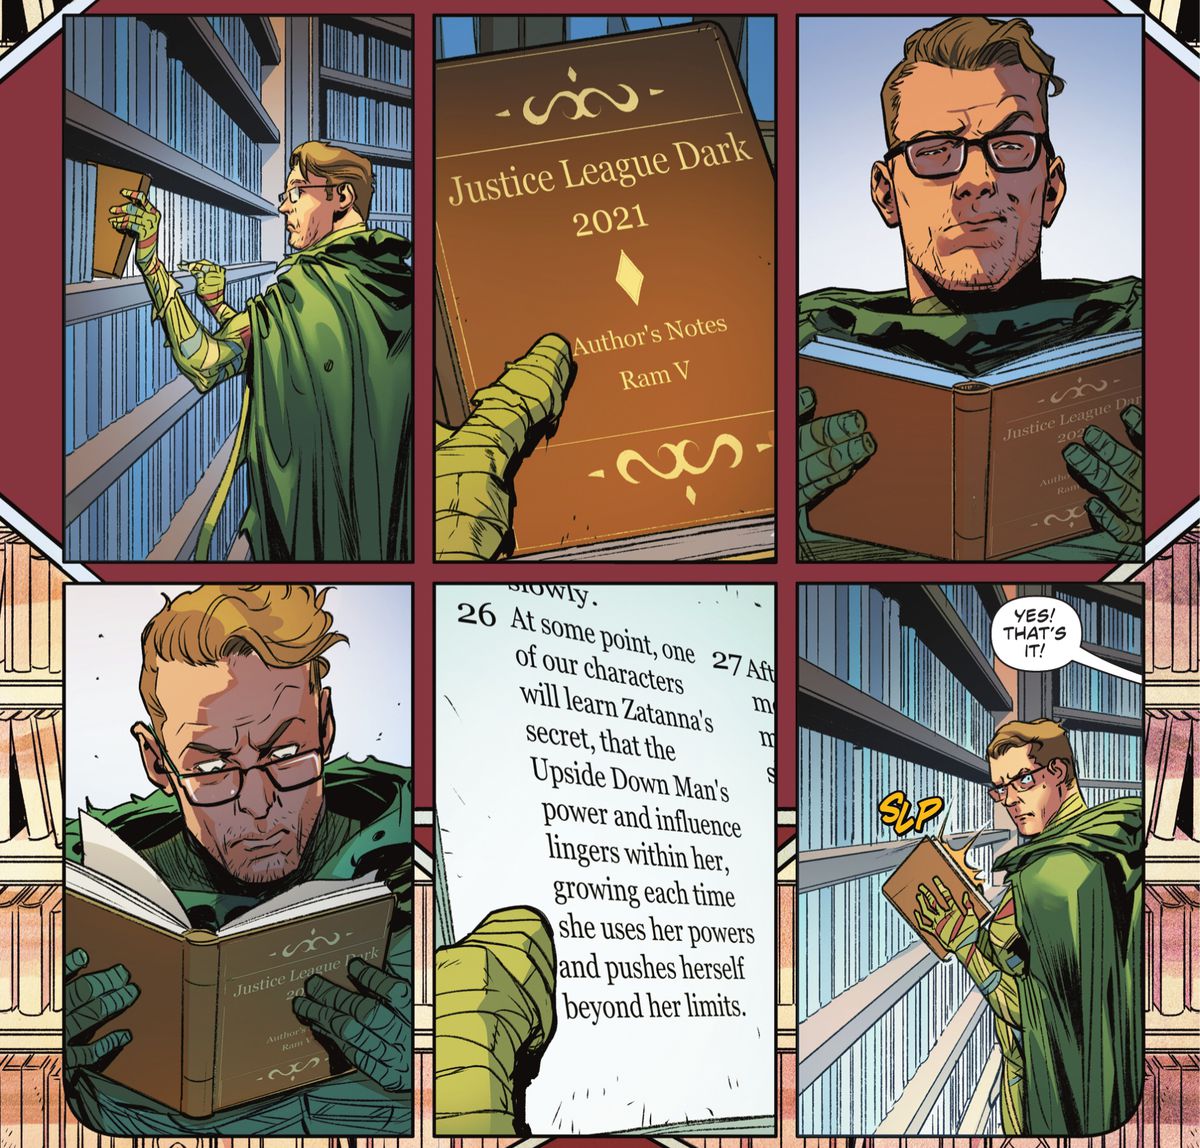 Ragman picks up a book titled “Justice League Dark 2023: Authors Notes” and opens it to find a paragraph describing Zatanna’s dark secret. He slaps the book shut with a furtive glance at the reader in Justice League #62 (2023). 